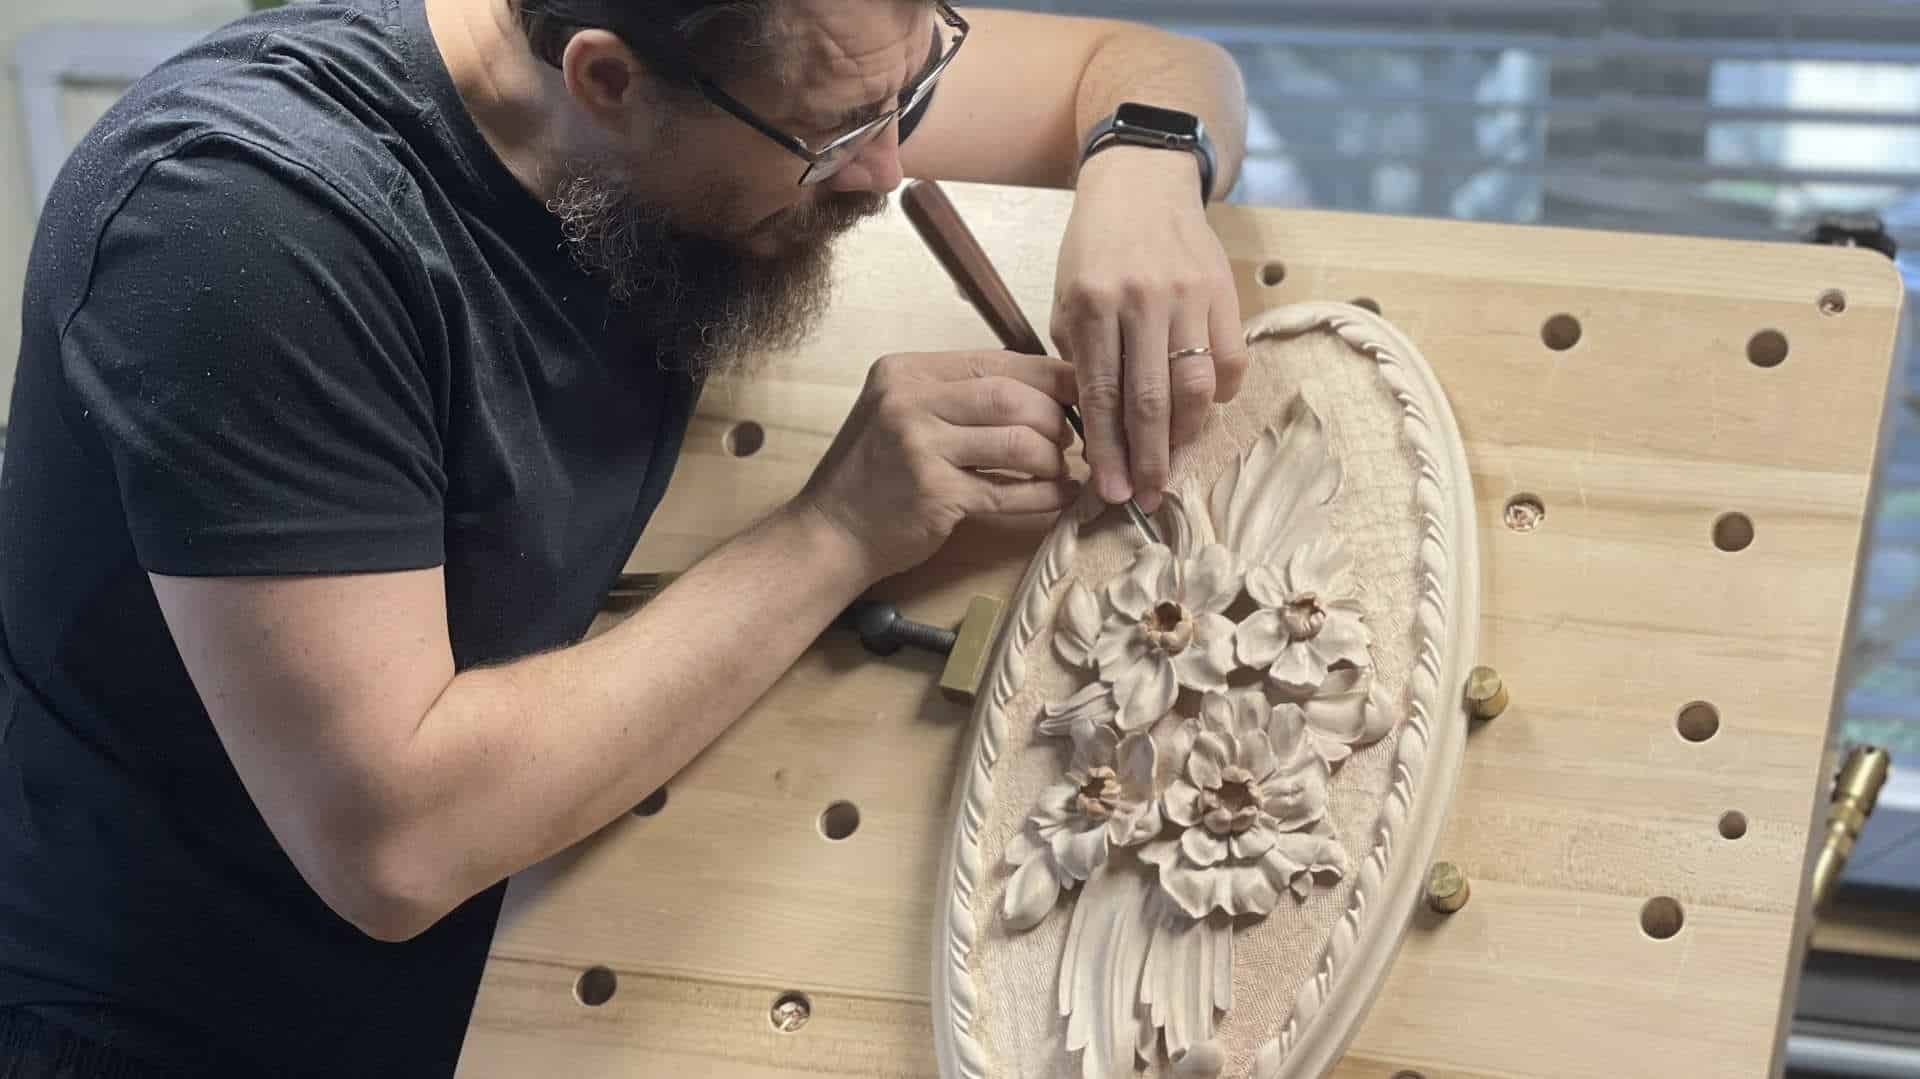 Learn the centuries-old skill of Venetian Flowers Rosette carving! This course will teach you step-by-step how to carve Venetian Flowers Rosette, from start to finish. Each lesson includes detailed instructions and diagrams to show you exactly how to properly carve the design. You will learn the different tools and techniques necessary along with a variety of design ideas. We will cover the basics of woodworking and safety, as well as more advanced topics such as multilayer carving and surface finishing. By the end of the course, you will have the skills and confidence to create beautiful Venetian Flowers Rosettes.